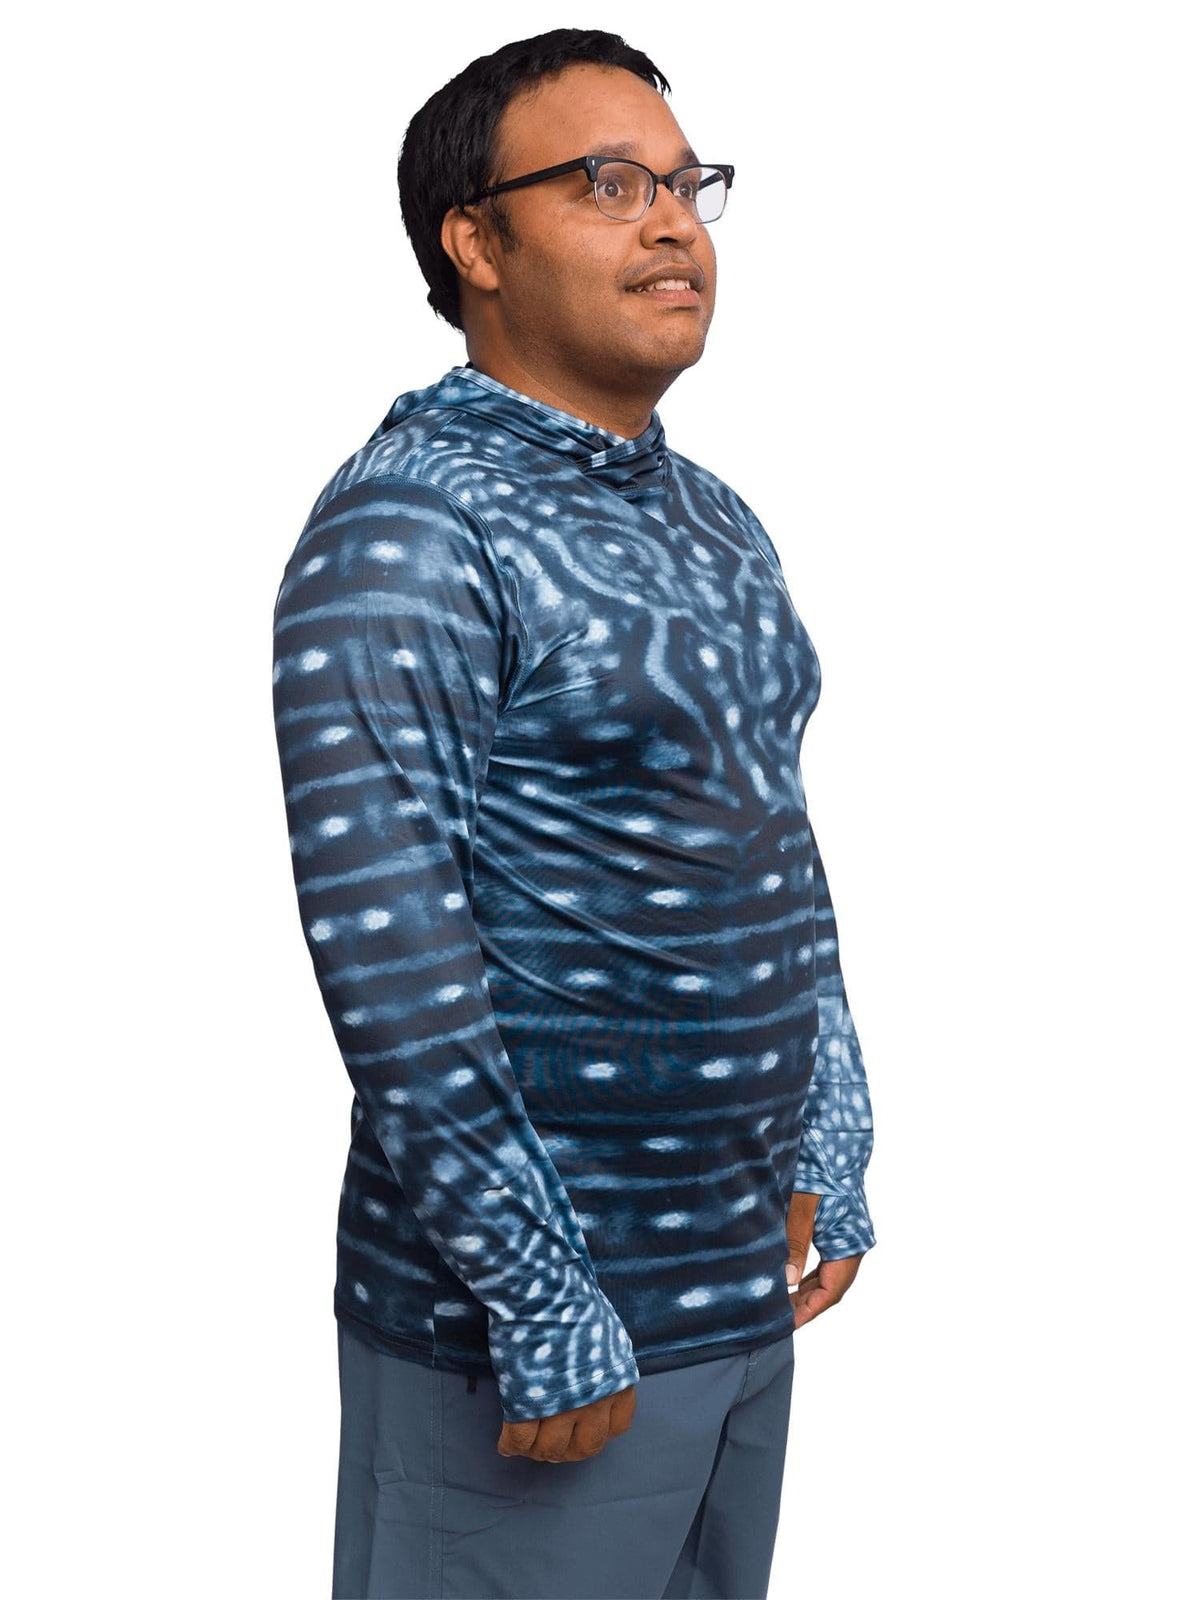 Model: Alberto is a professional sailor and filmmaker promoting youth participation in conservation and water sports. He is 6&#39;, 247lbs and wearing a size 2XL shirt and 39 boardshorts. 